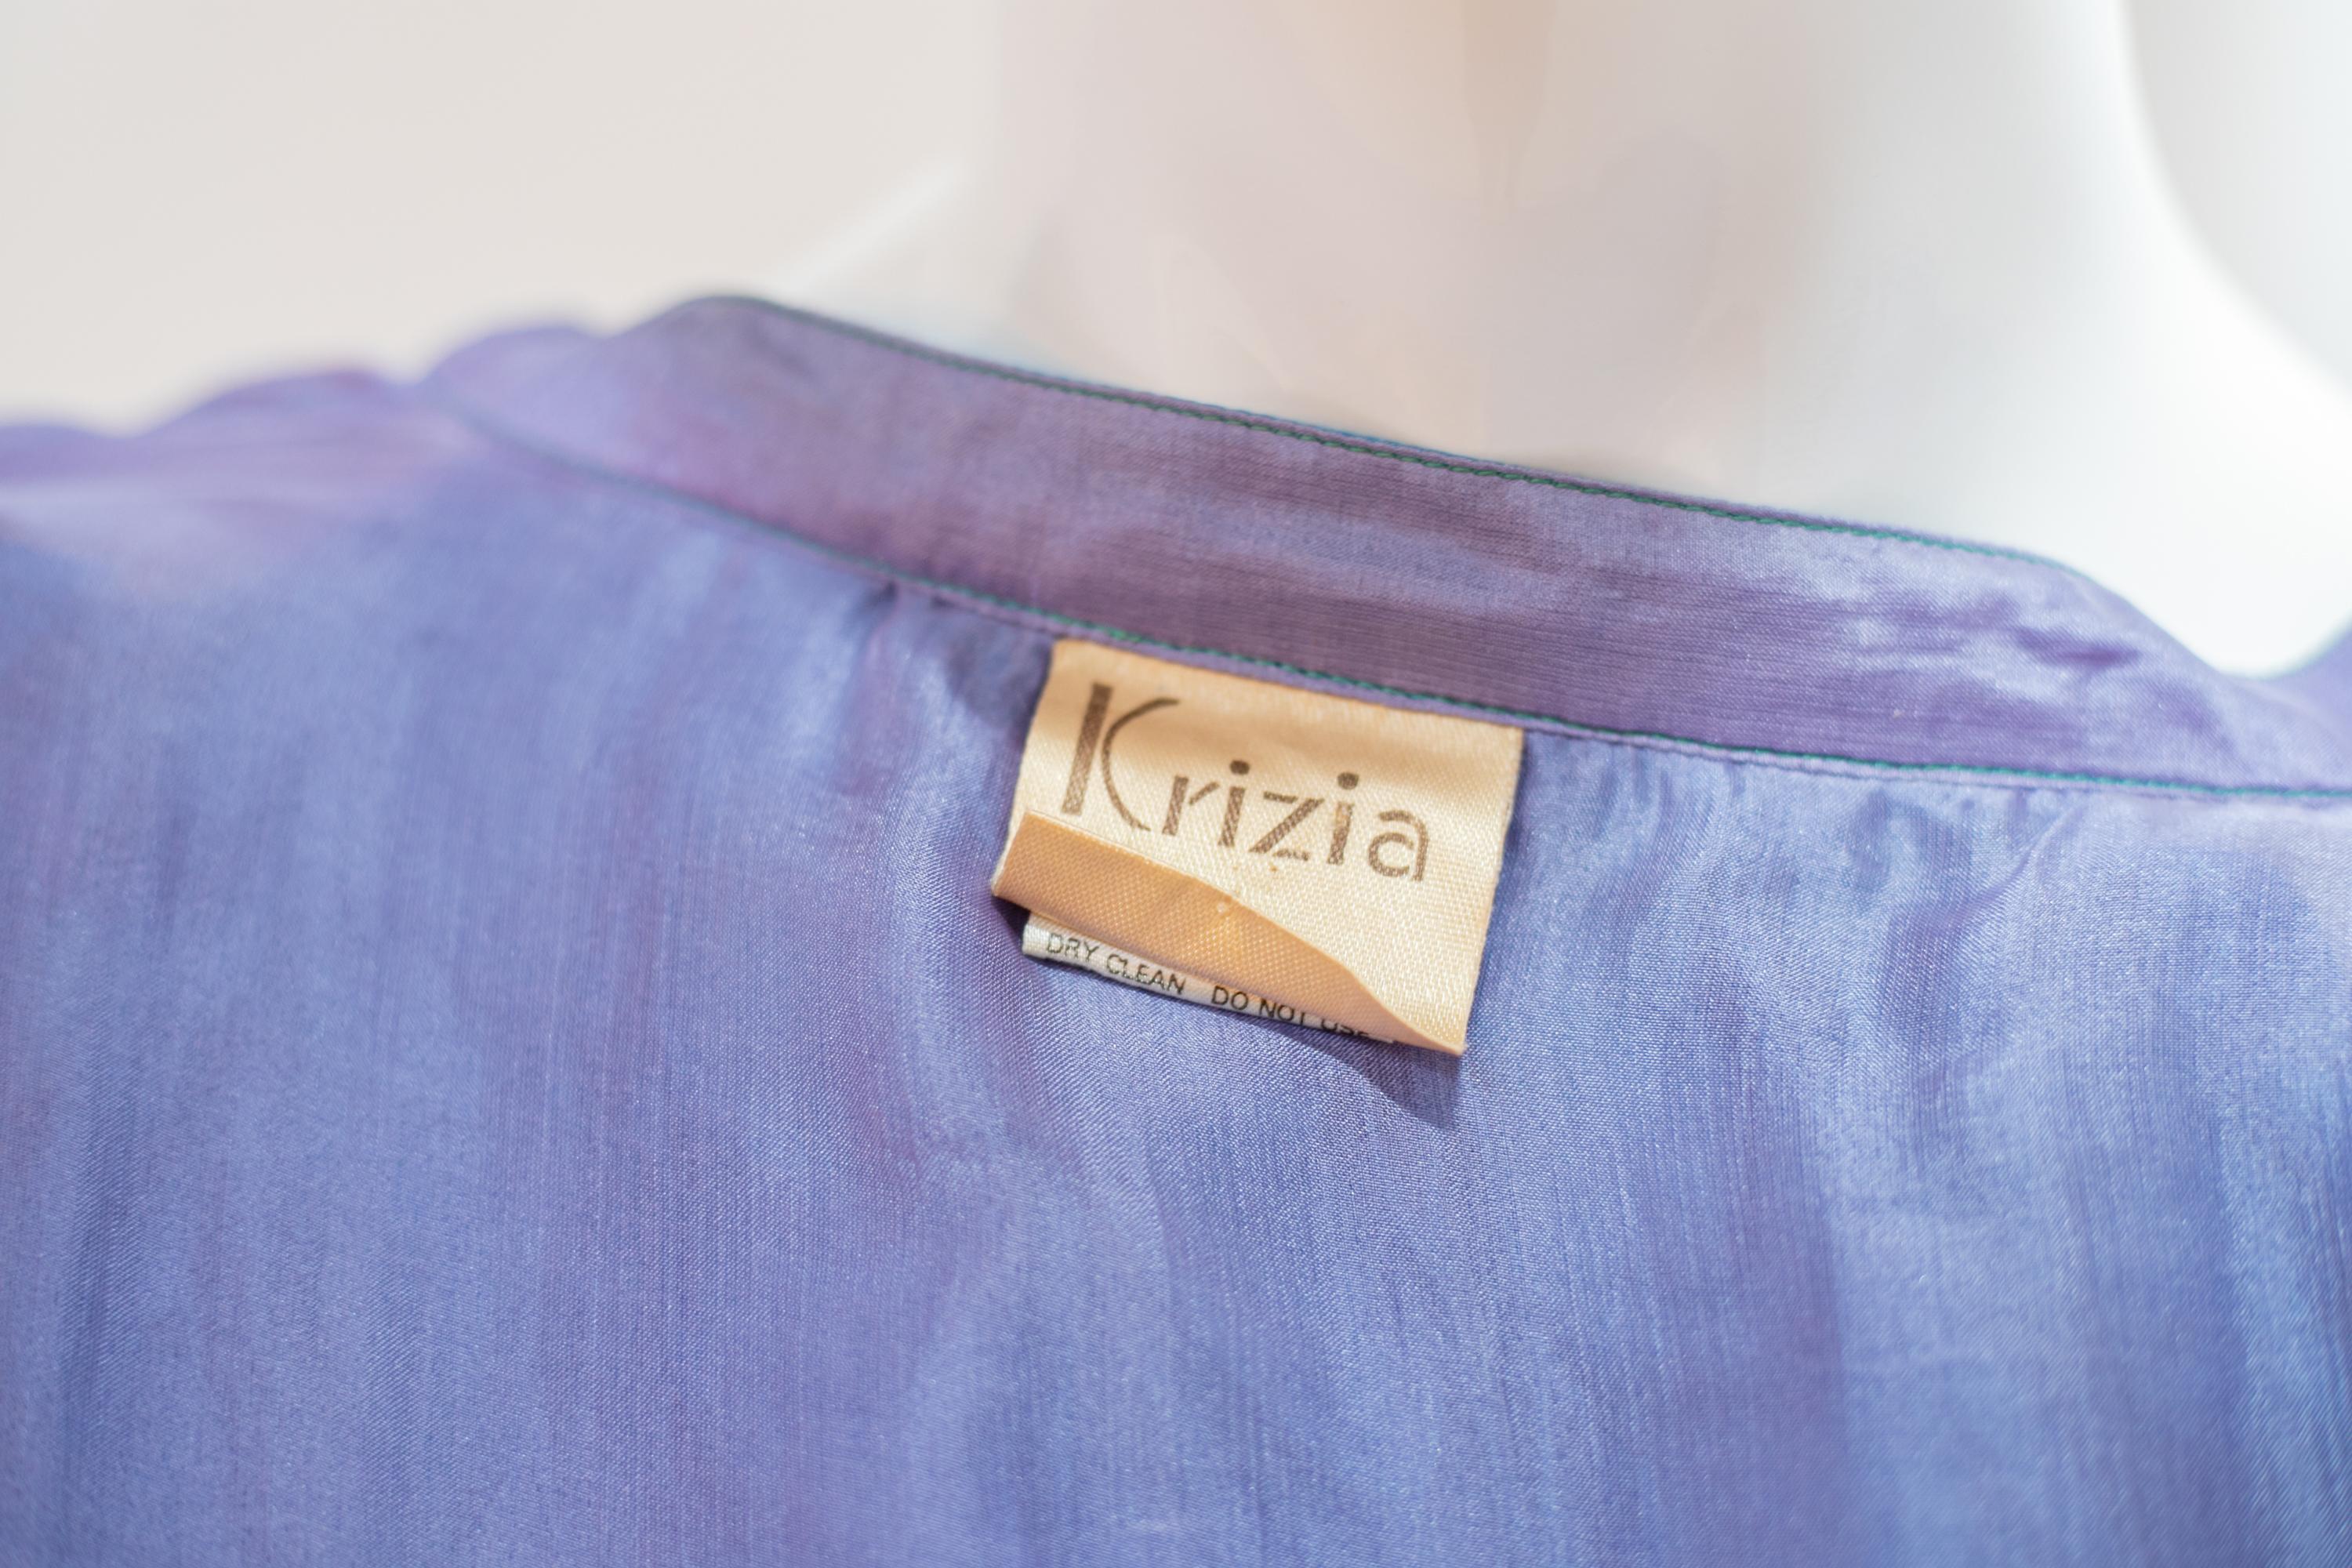 Fluttering vintage silk blouse from the 1990s by Krizia, made in Italy.
ORIGINAL LABEL.
The blouse is totally made of light blue silk with long sleeves with narrower cuffs, creating a beautiful butterfly effect. The collar has the classic standard